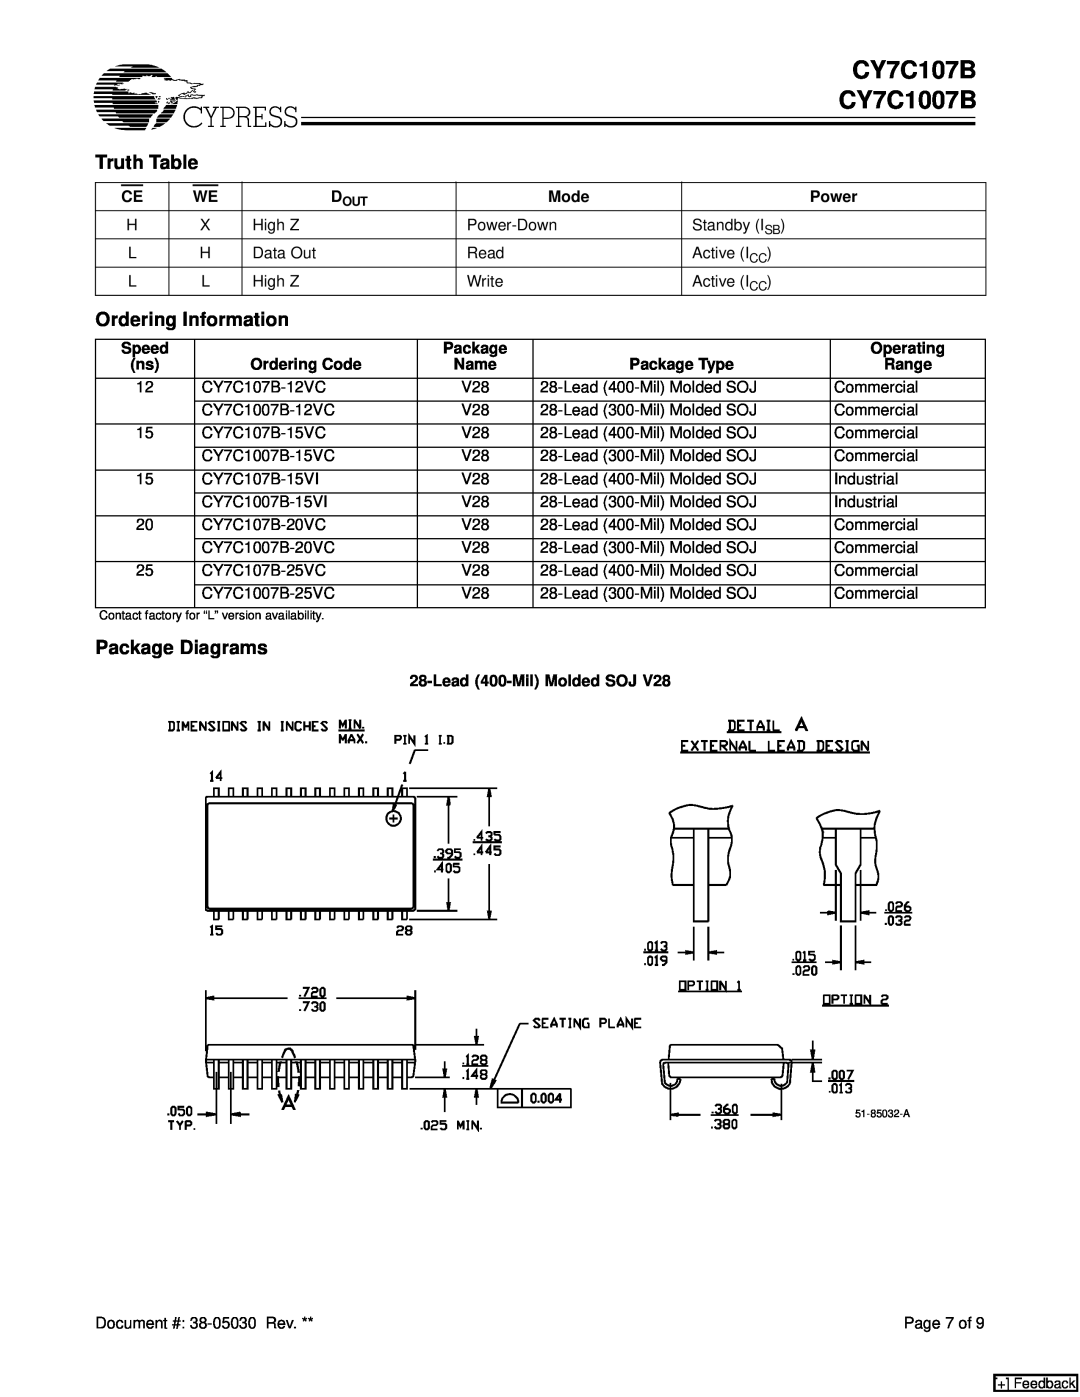 Cypress CY7C1007B manual CY7C107B, Truth Table, Ordering Information, Package Diagrams 